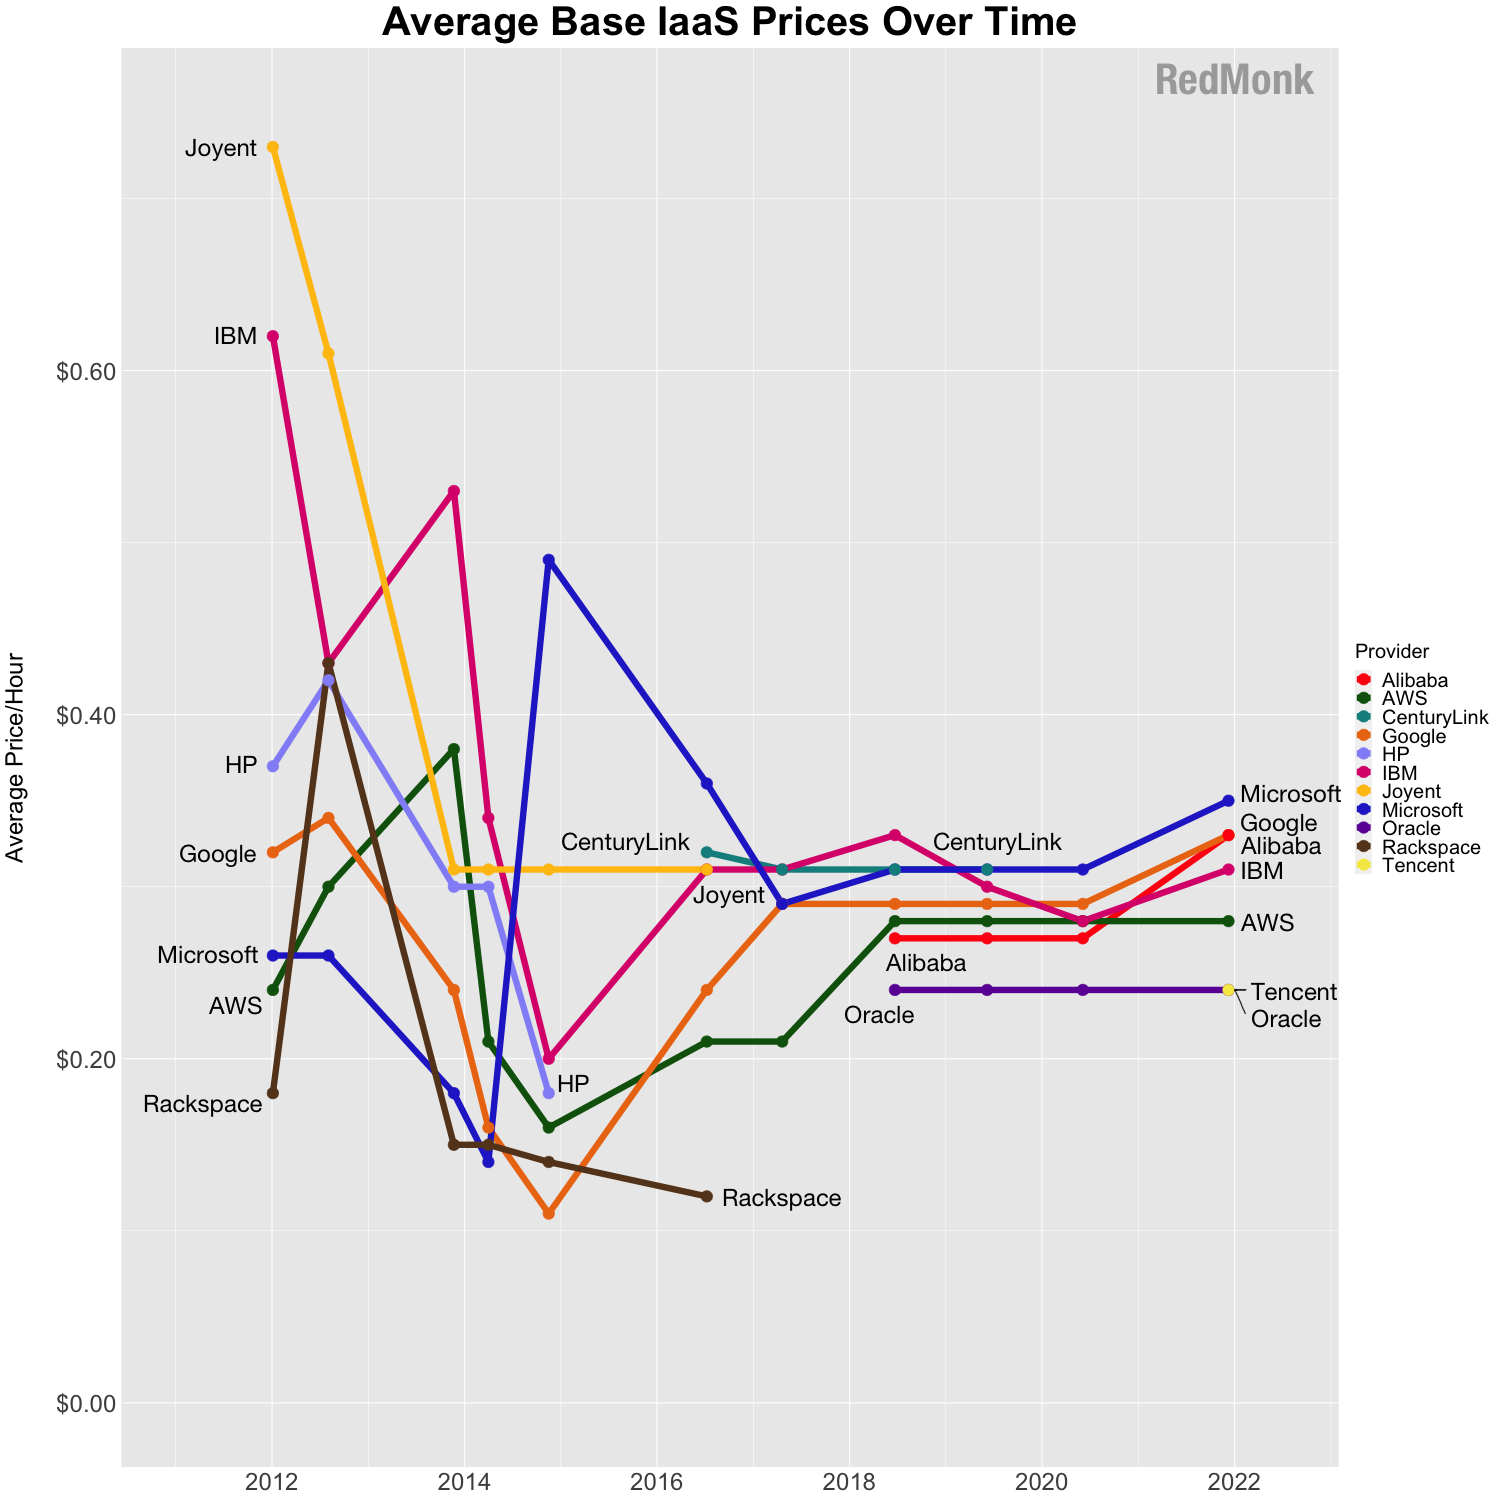 Average base IaaS prices across providers from 2012 to 2021